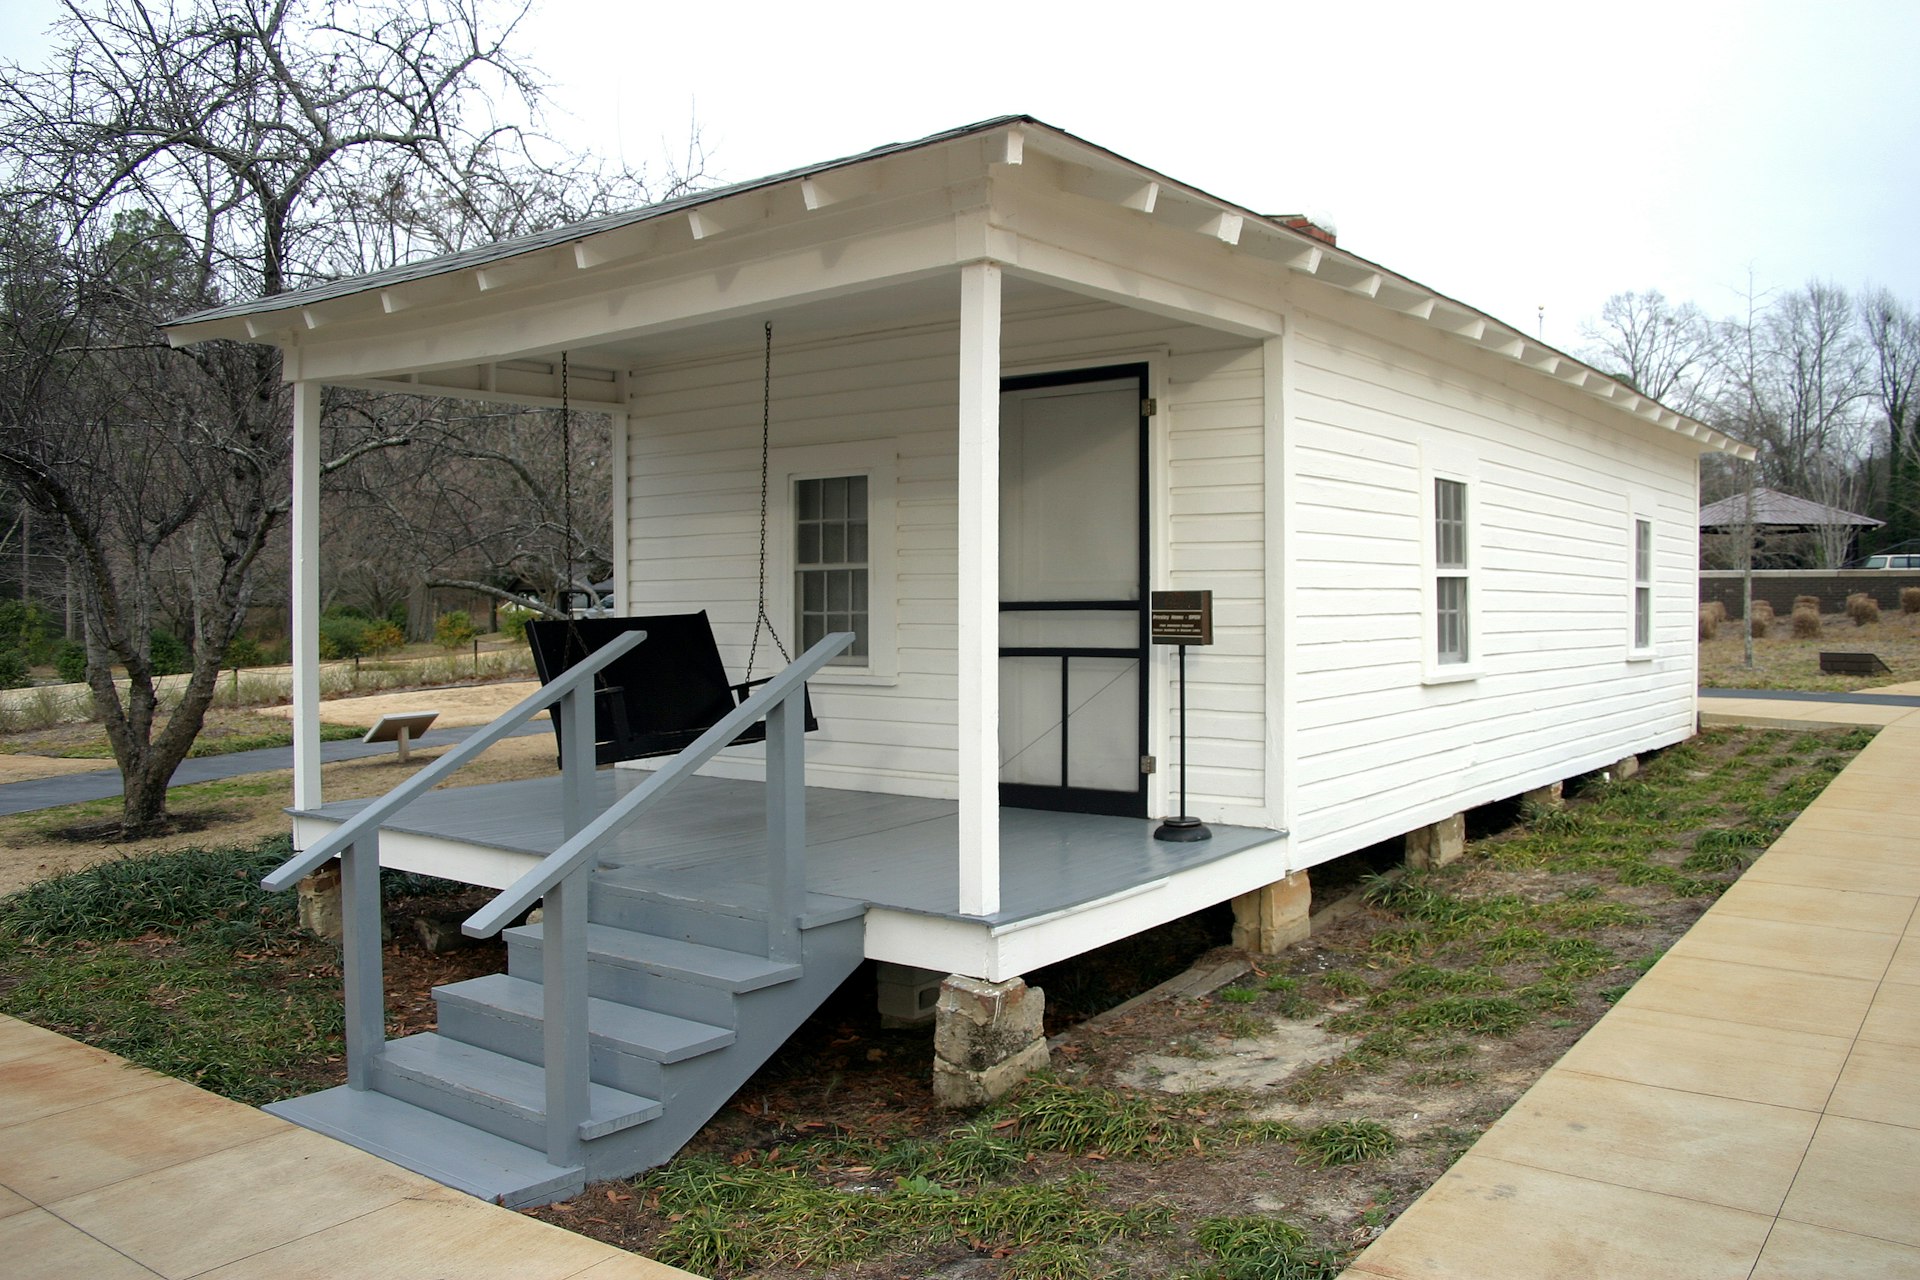 Exterior of the Elvis Presley Birthplace in Tupelo, Mississippi